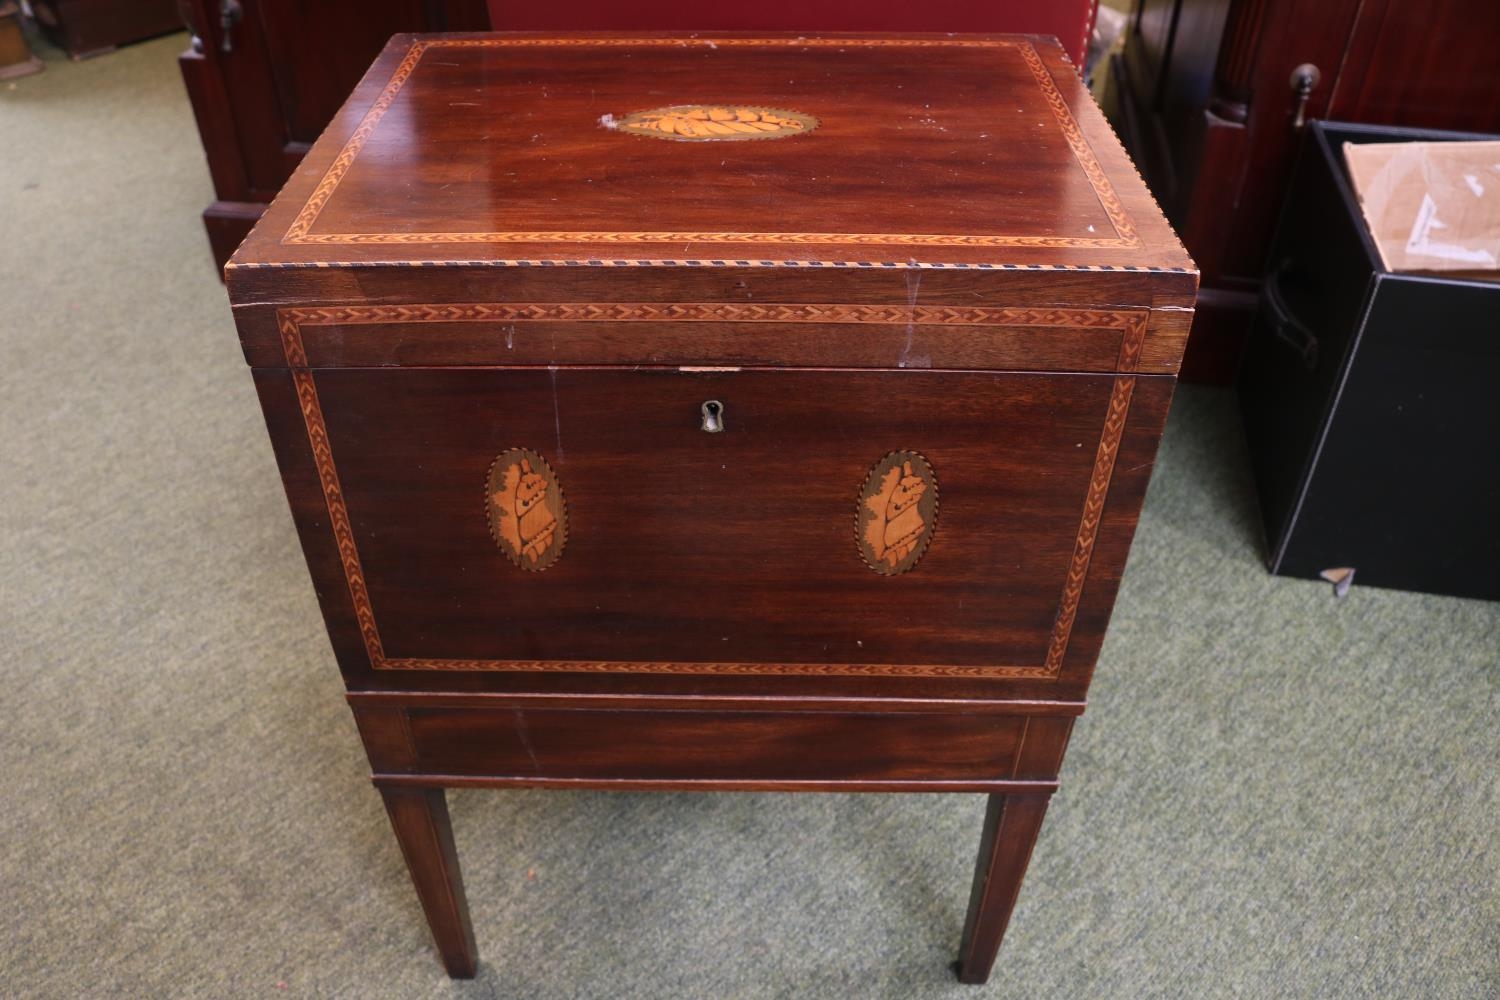 Georgian Inlaid Mahogany Wine Cooler on stand with integral drawer supported on tapering legs. - Image 2 of 6